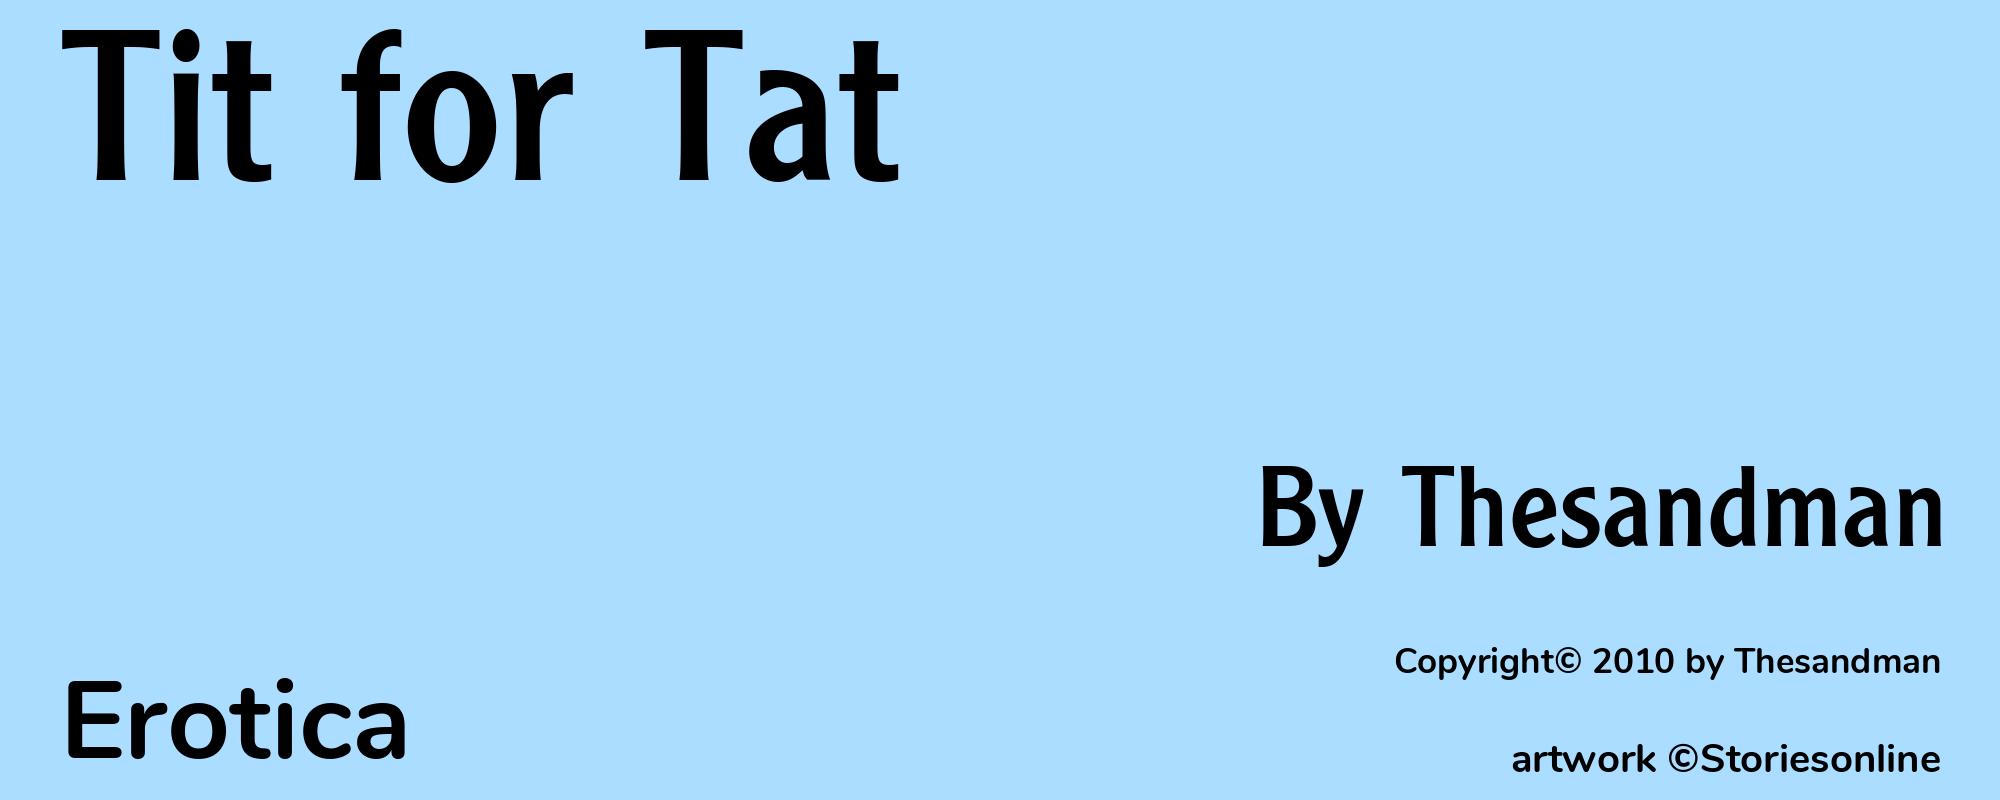 Tit for Tat - Cover